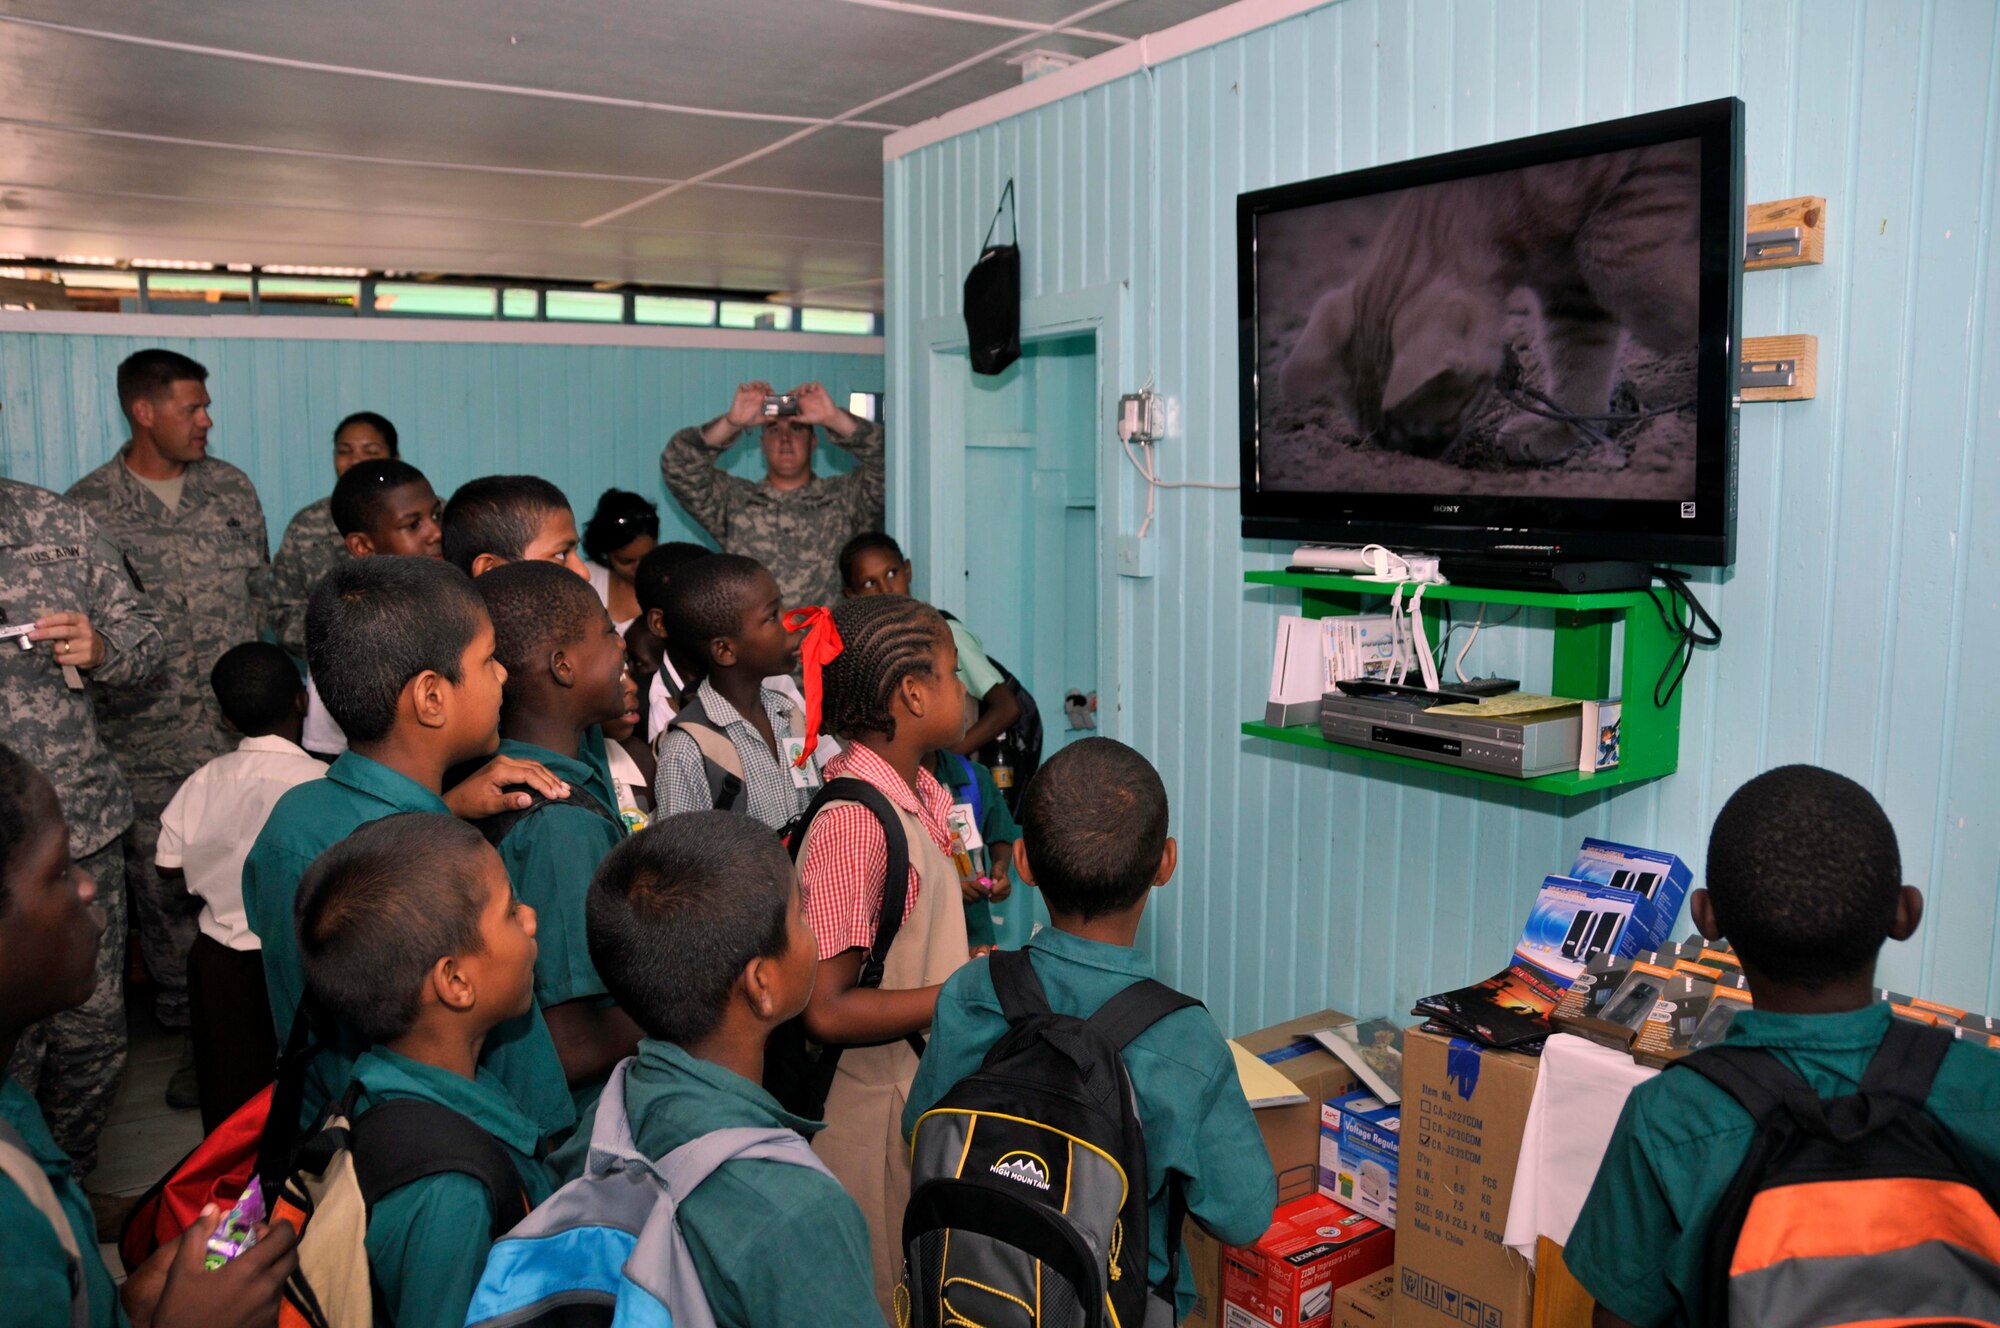 Children from the Joshua's Place Orphanage, watch a movie on their brand new 40 inch TV Sept. 9, 2009. Soldiers from the Georgia Army National used donation money collected back home, to buy a 40 inch LCD TV, a Nintendo Wii with six video games, 20 MP3 players and a DVD/VCR player (U.S. Air Force photo by Airman 1st Class Perry Aston) (Released)